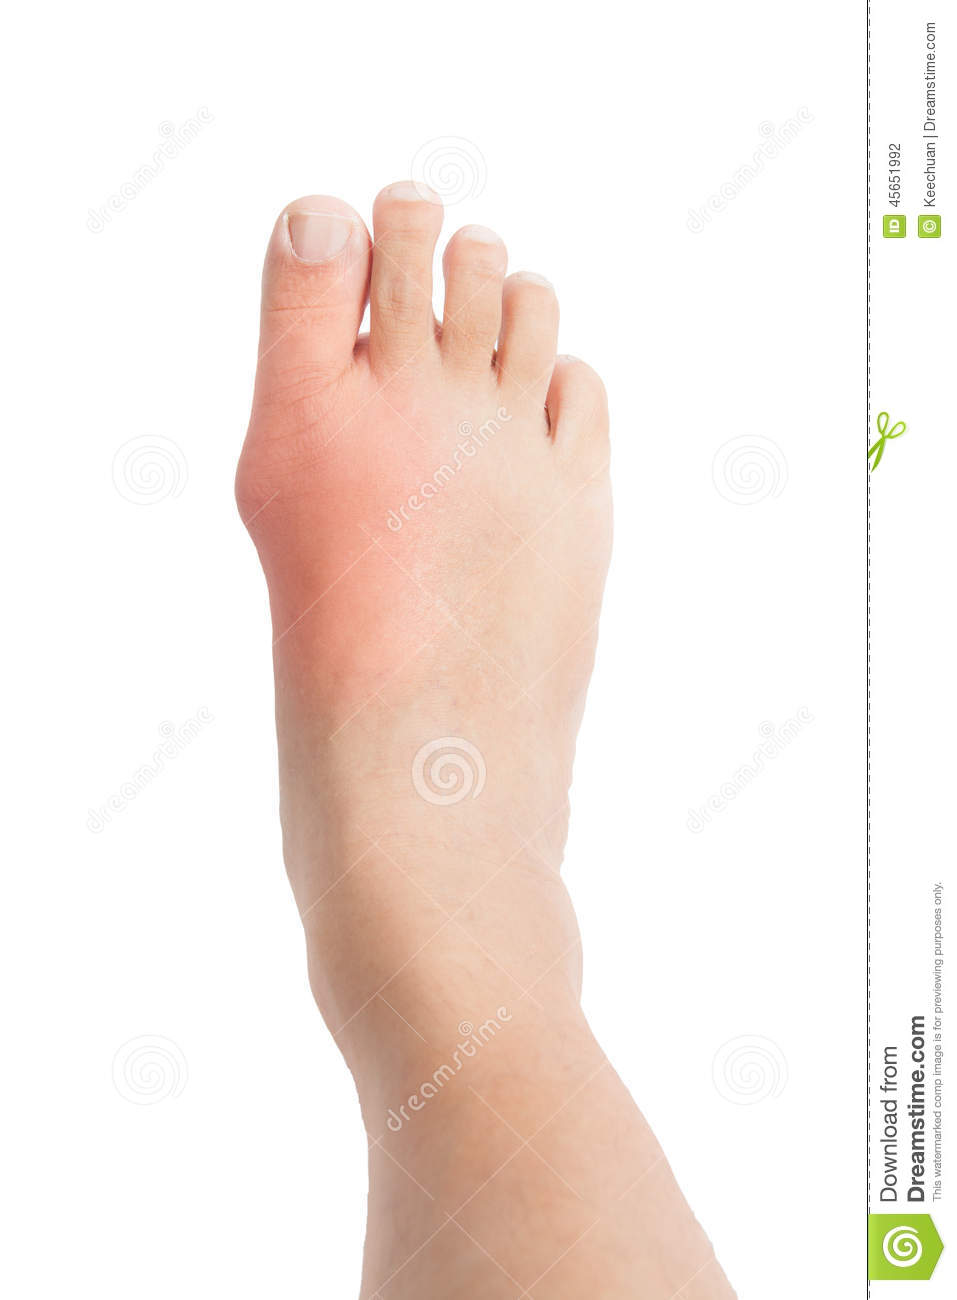 Swollen Foot With Gout Inflammation Stock Photo   Image  45651992